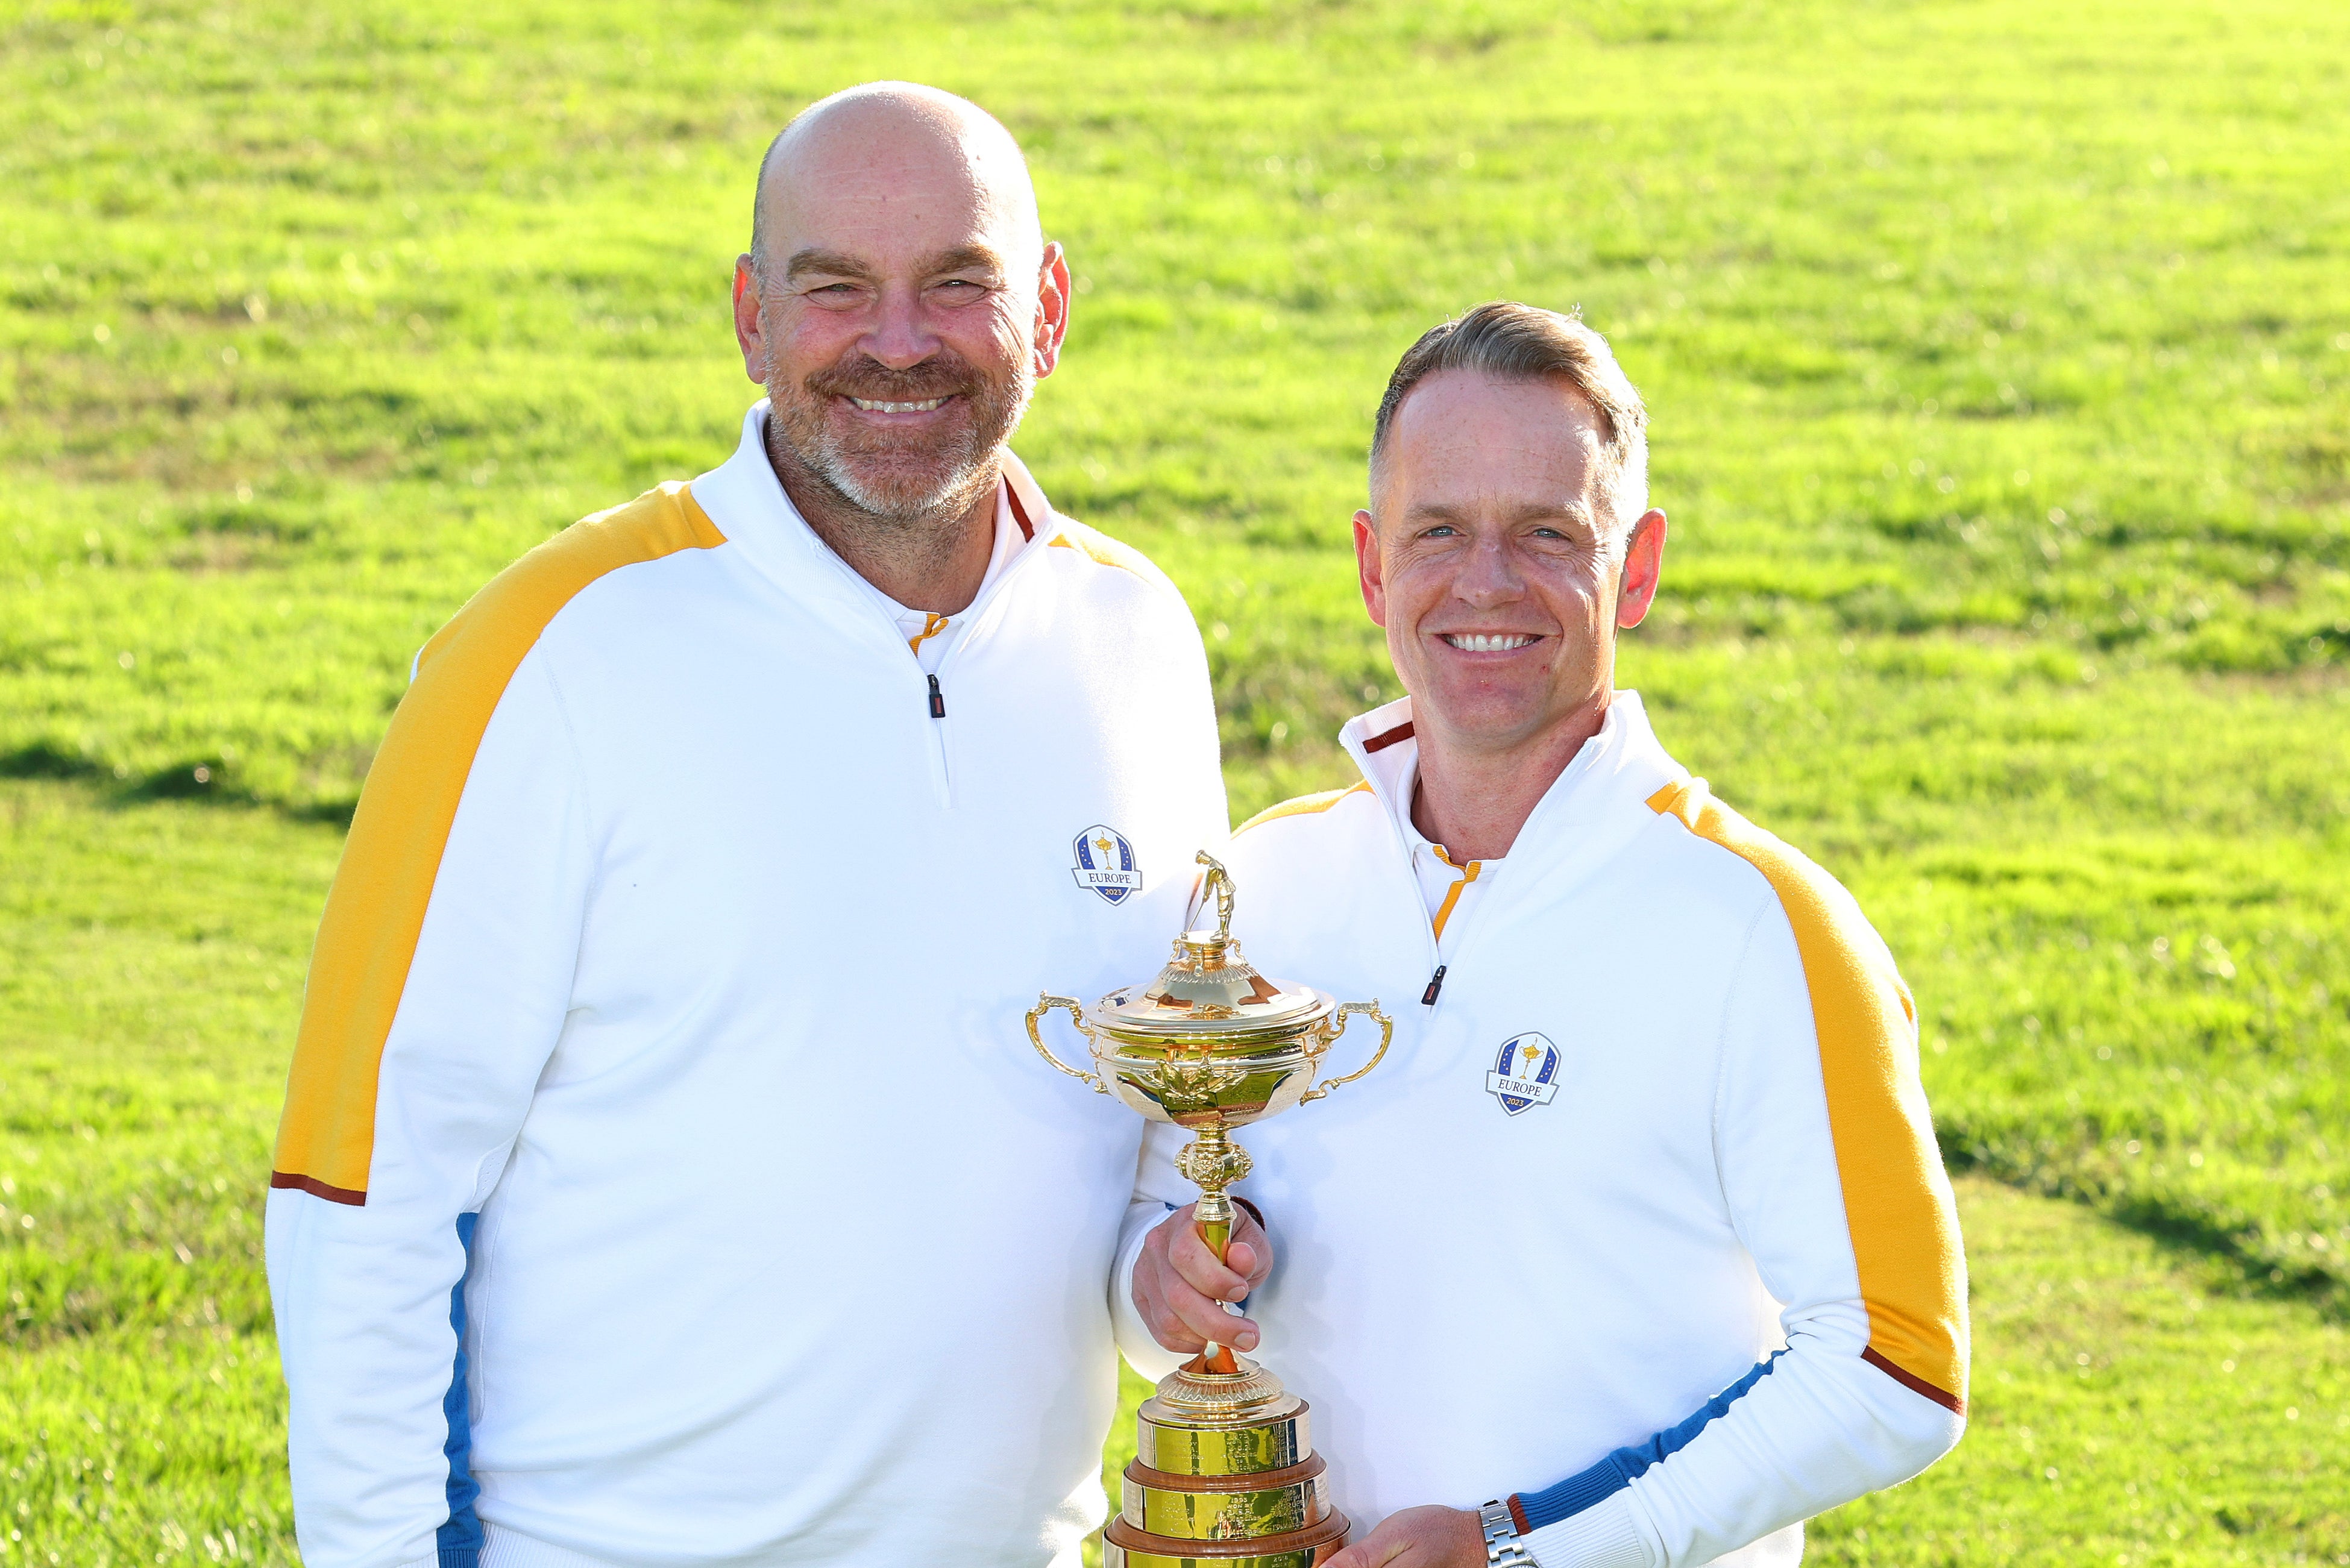 Vice-captain Thomas Bjorn and captain Luke Donald pose with the Ryder Cup trophy ahead of the tournament in Rome